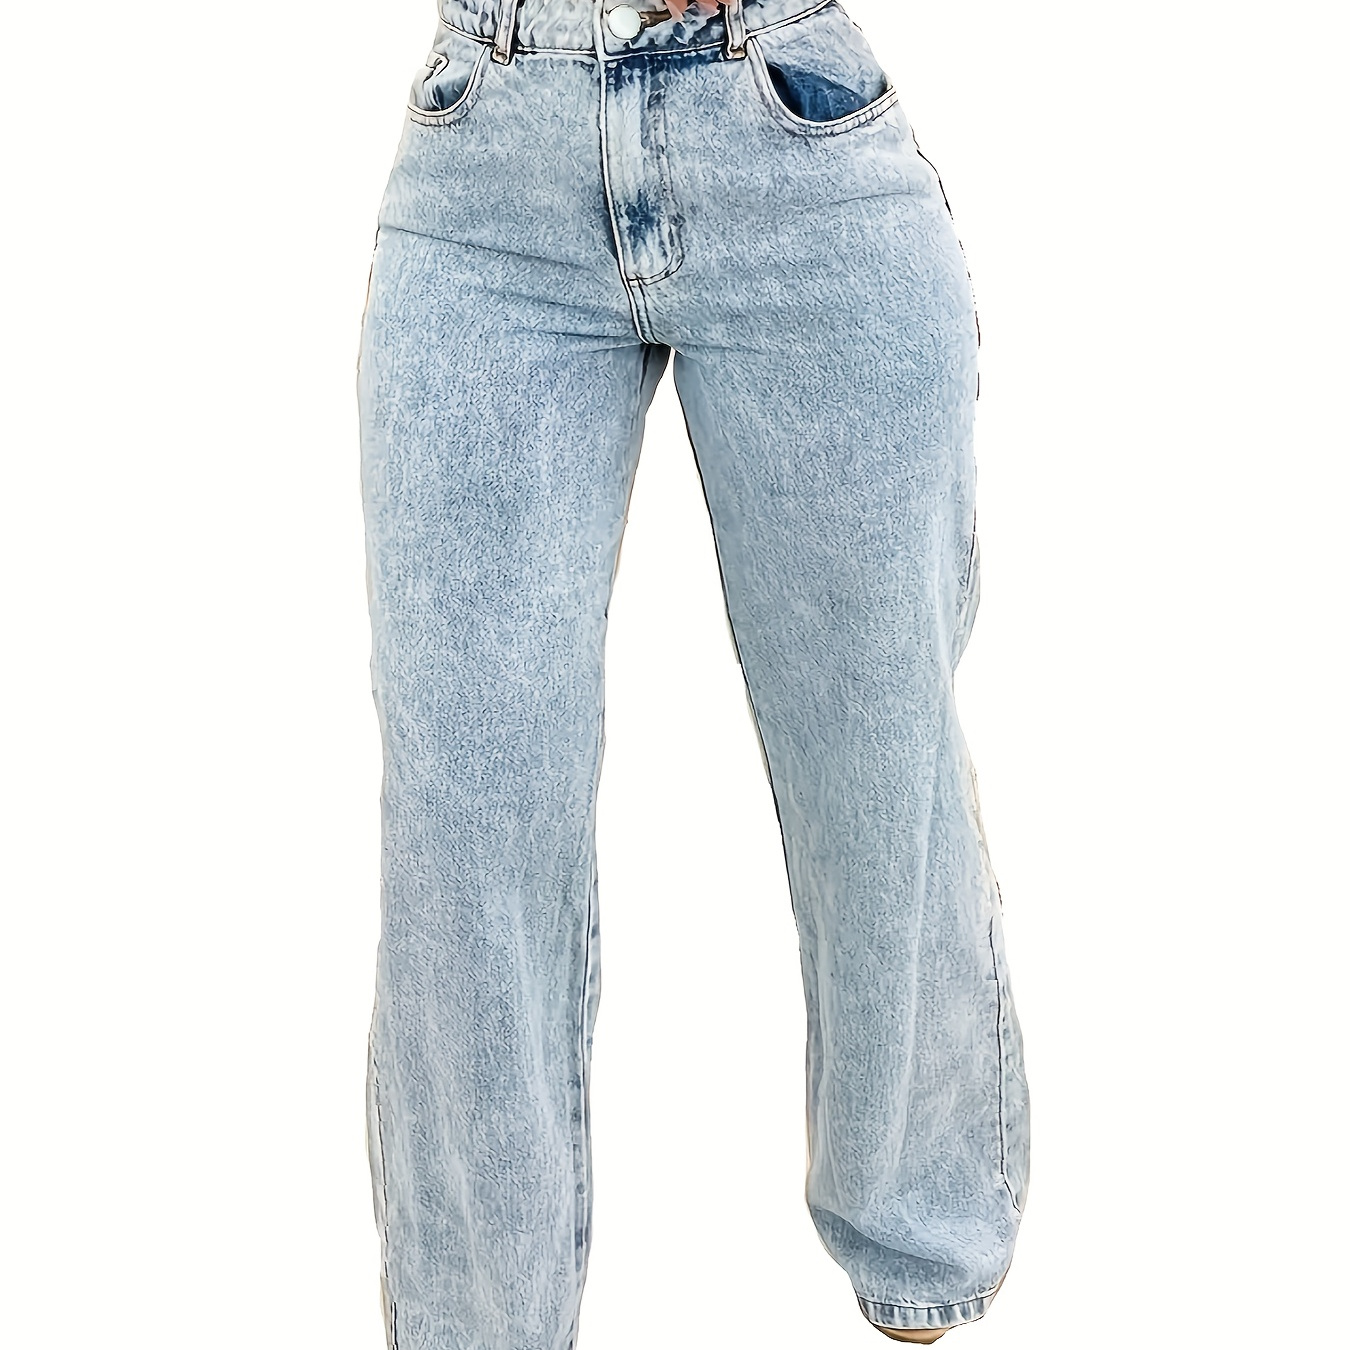 

Women's High Waist Street Style Jeans, Light Blue Washed Straight-leg Denim Pants, Stretchy Casual Full Length Trousers